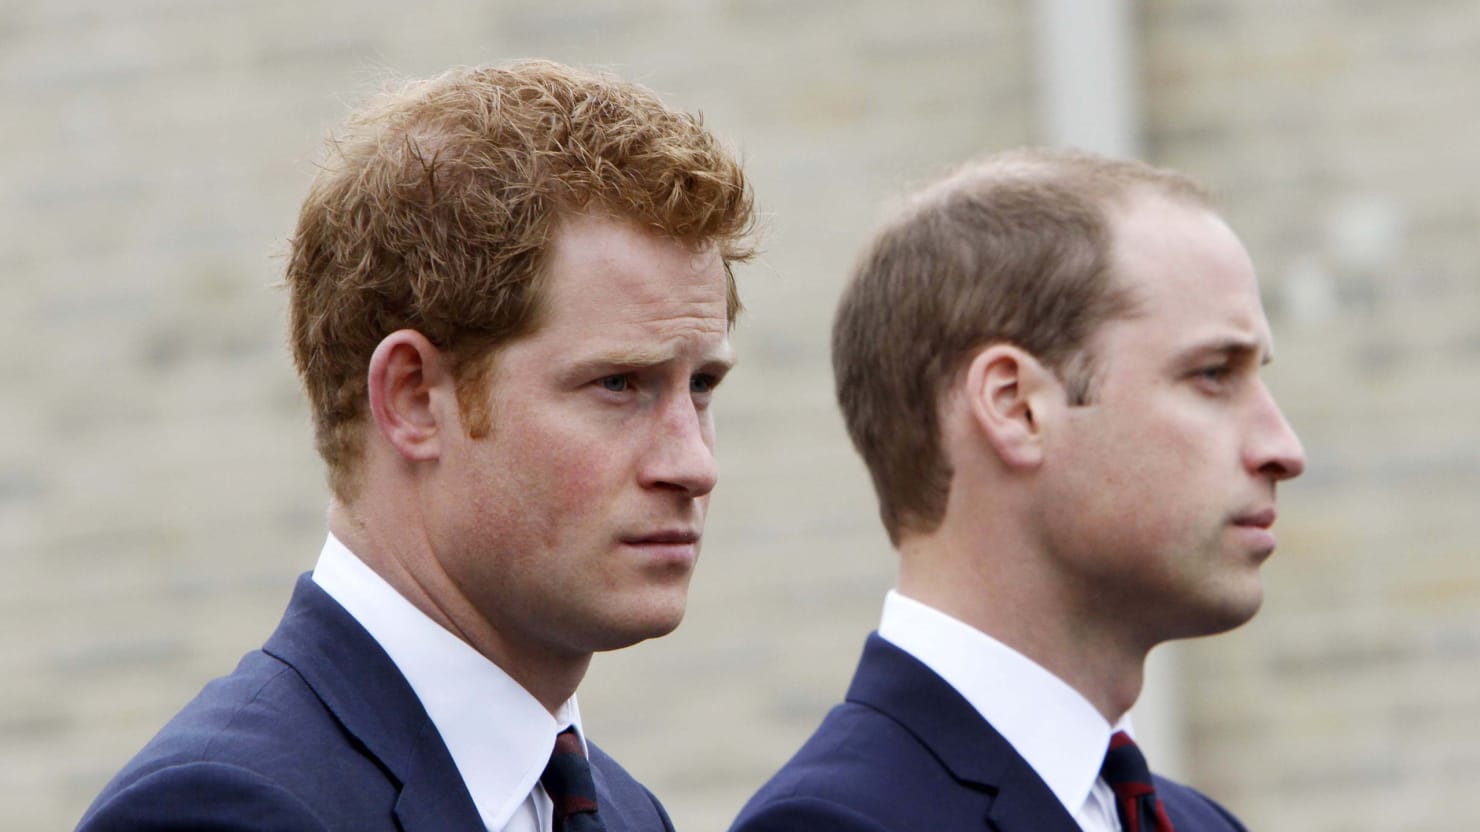 Prince Harry Told His Brother, 